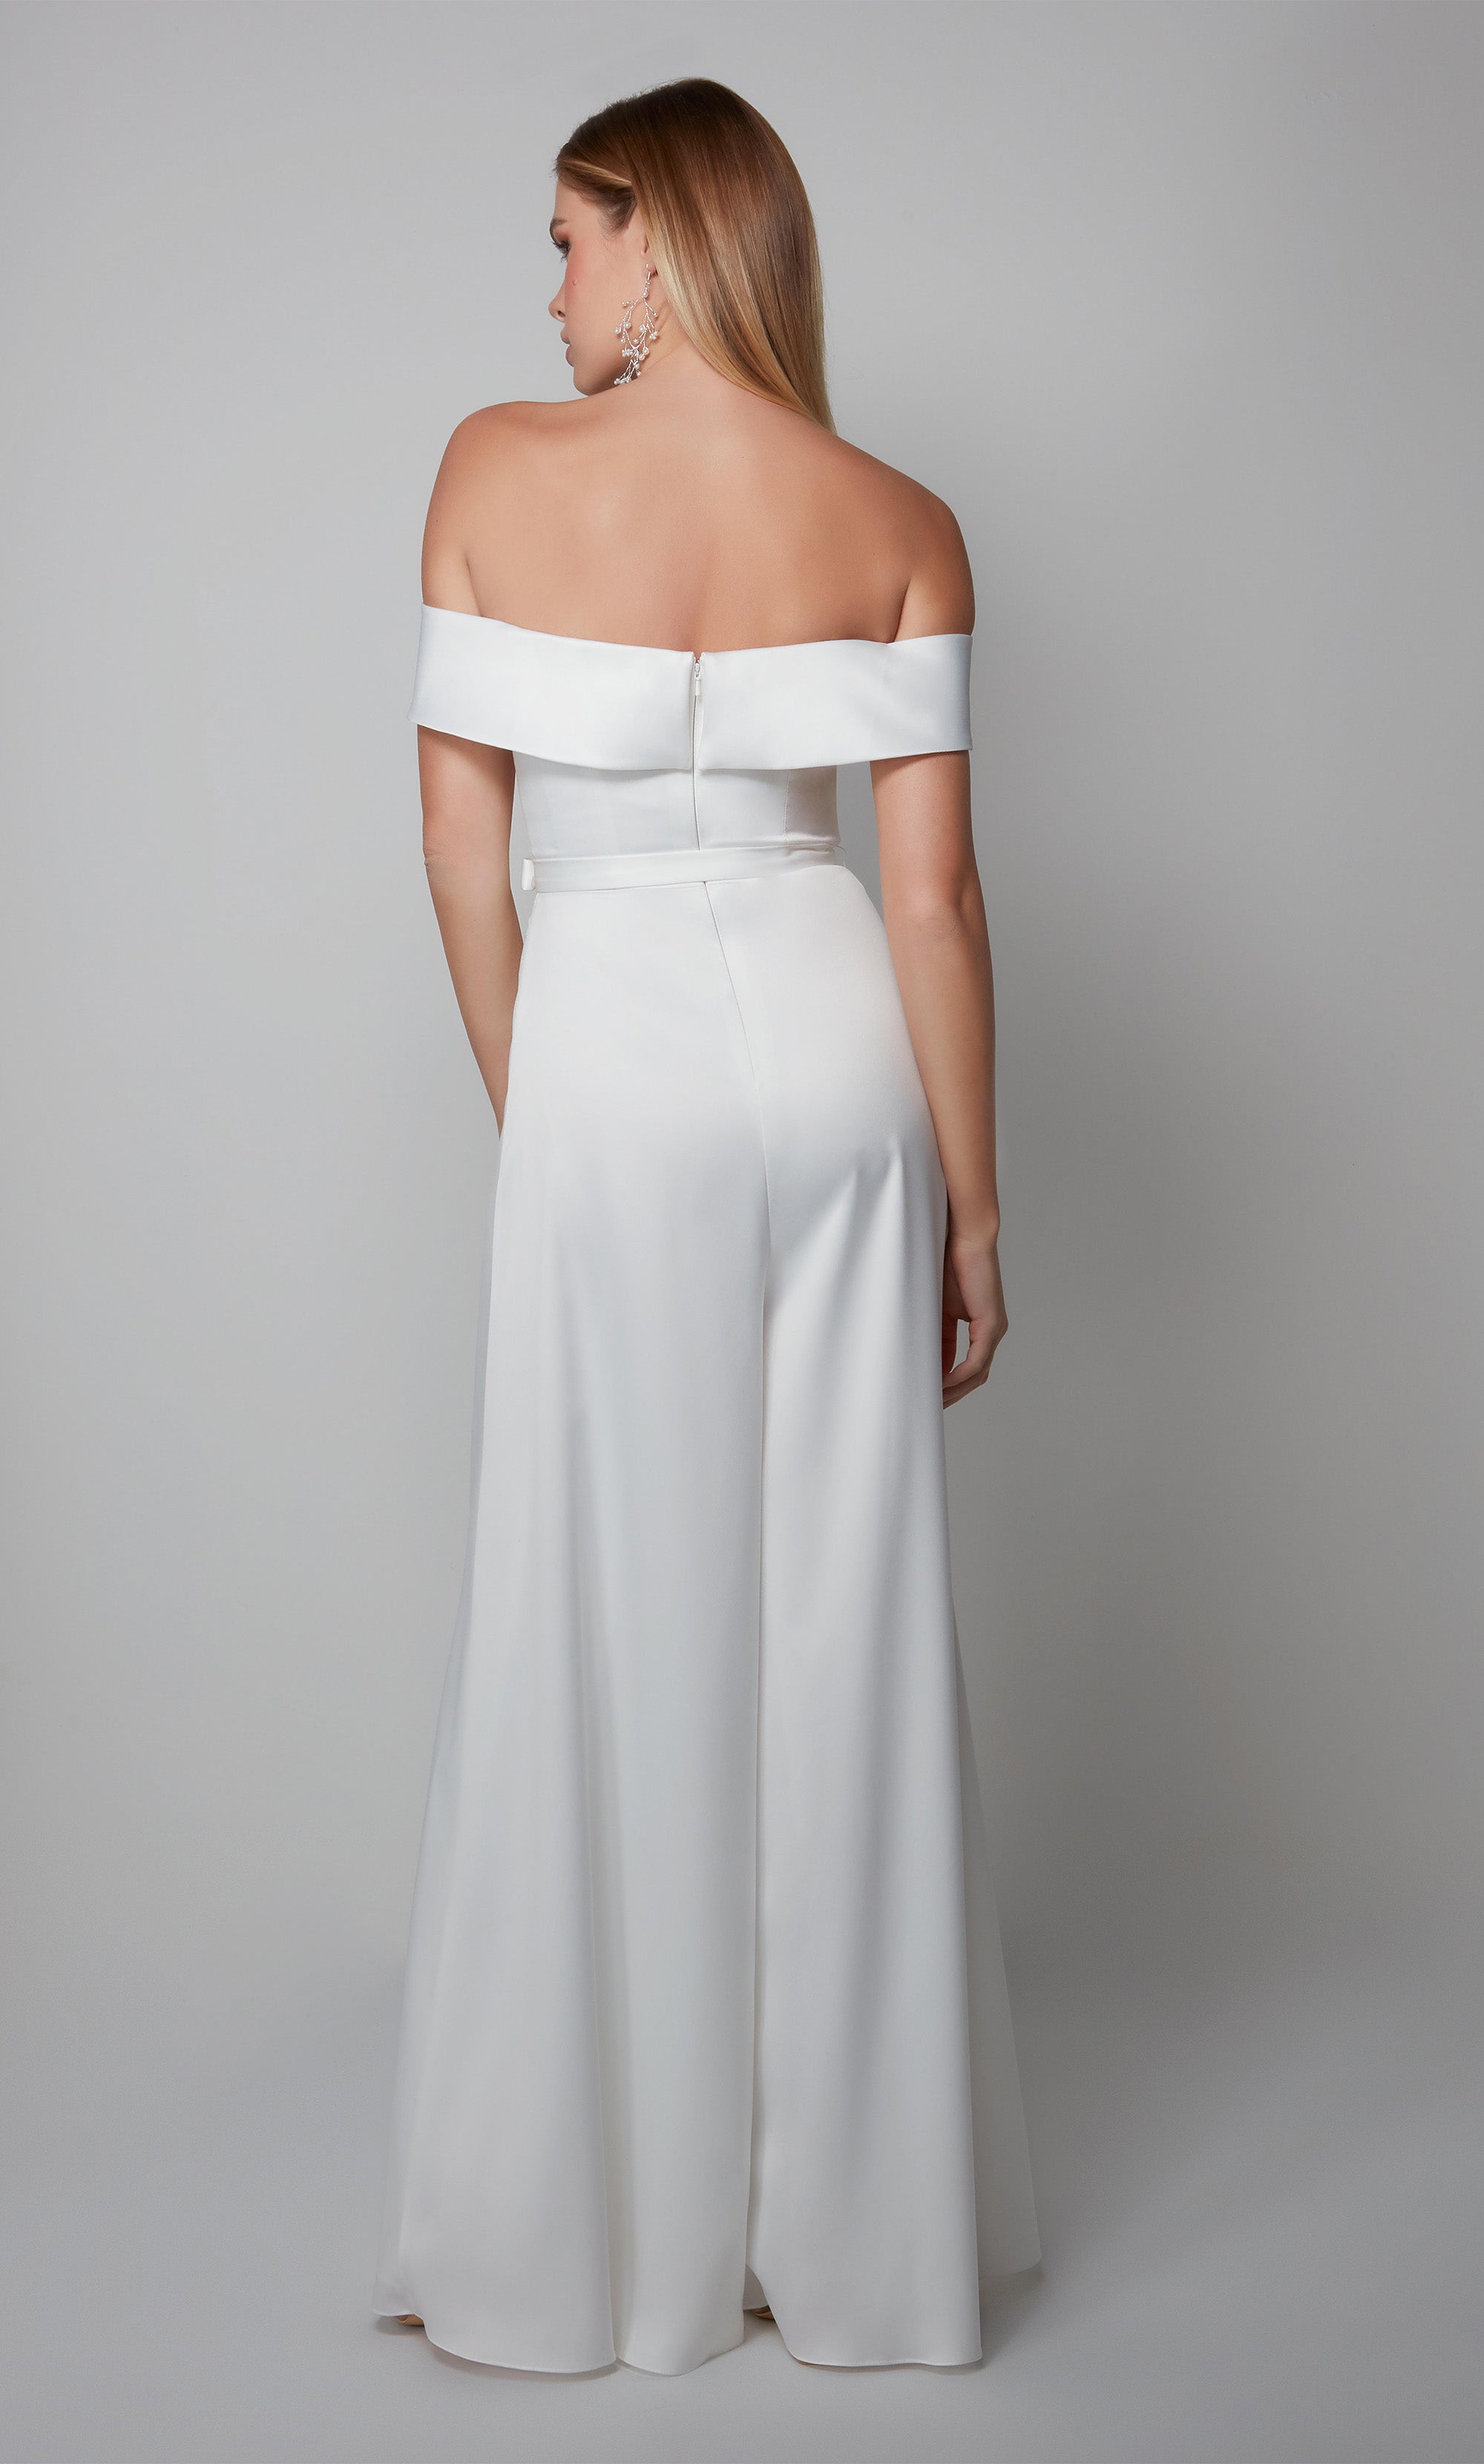 White engagement jumpsuit with an elegant off the shoulder neckline and matching belt at the natural waist. Color-SWATCH_70012__DIAMOND-WHITE